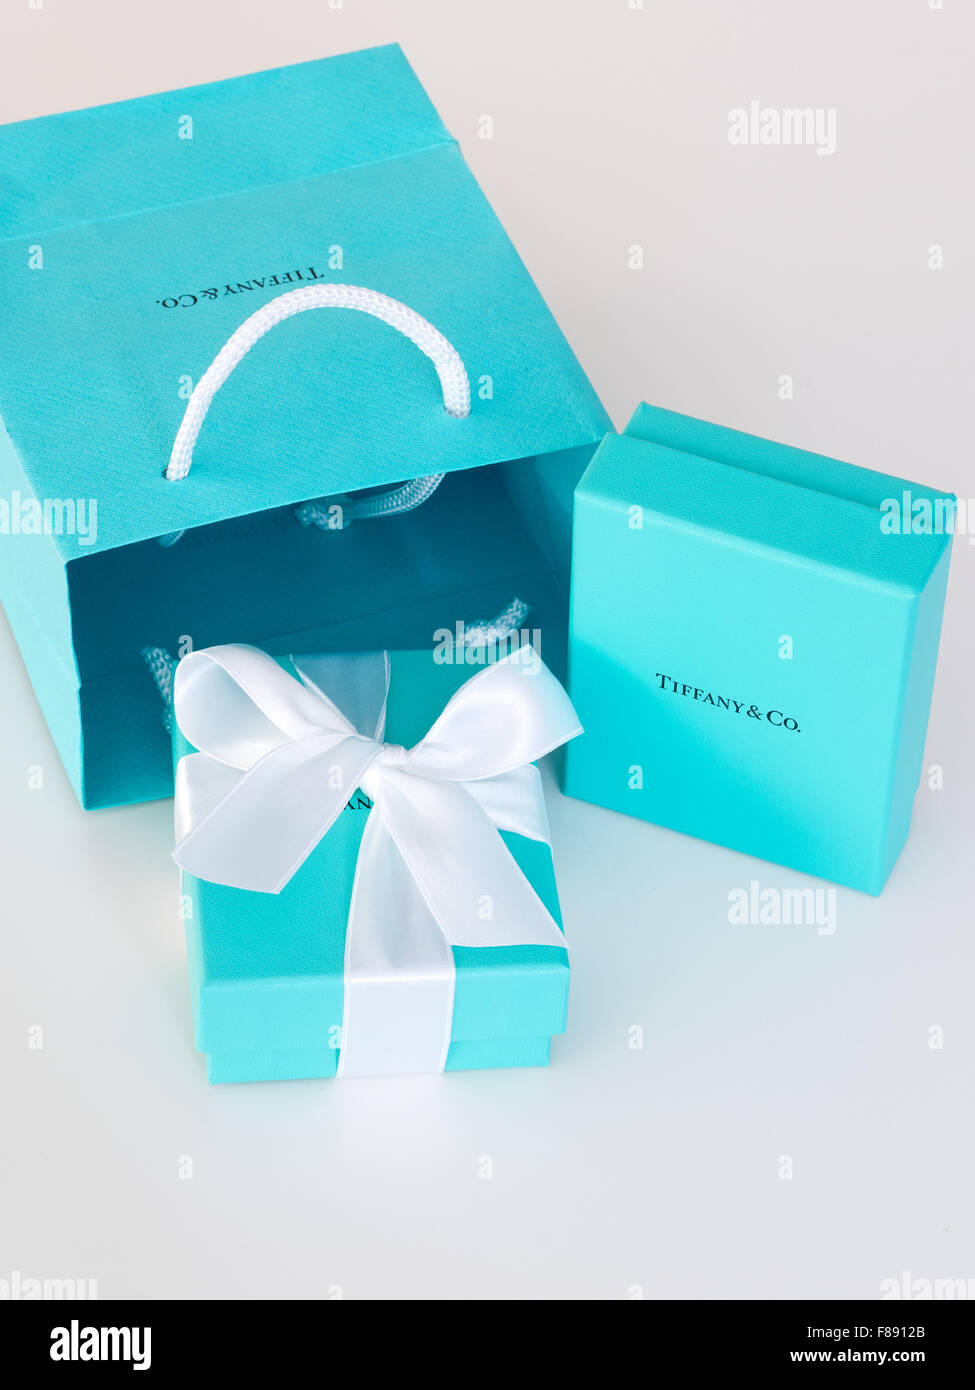 Tiffany & Co. Empty Packaging blue Jewelry Gift Box & Pouch